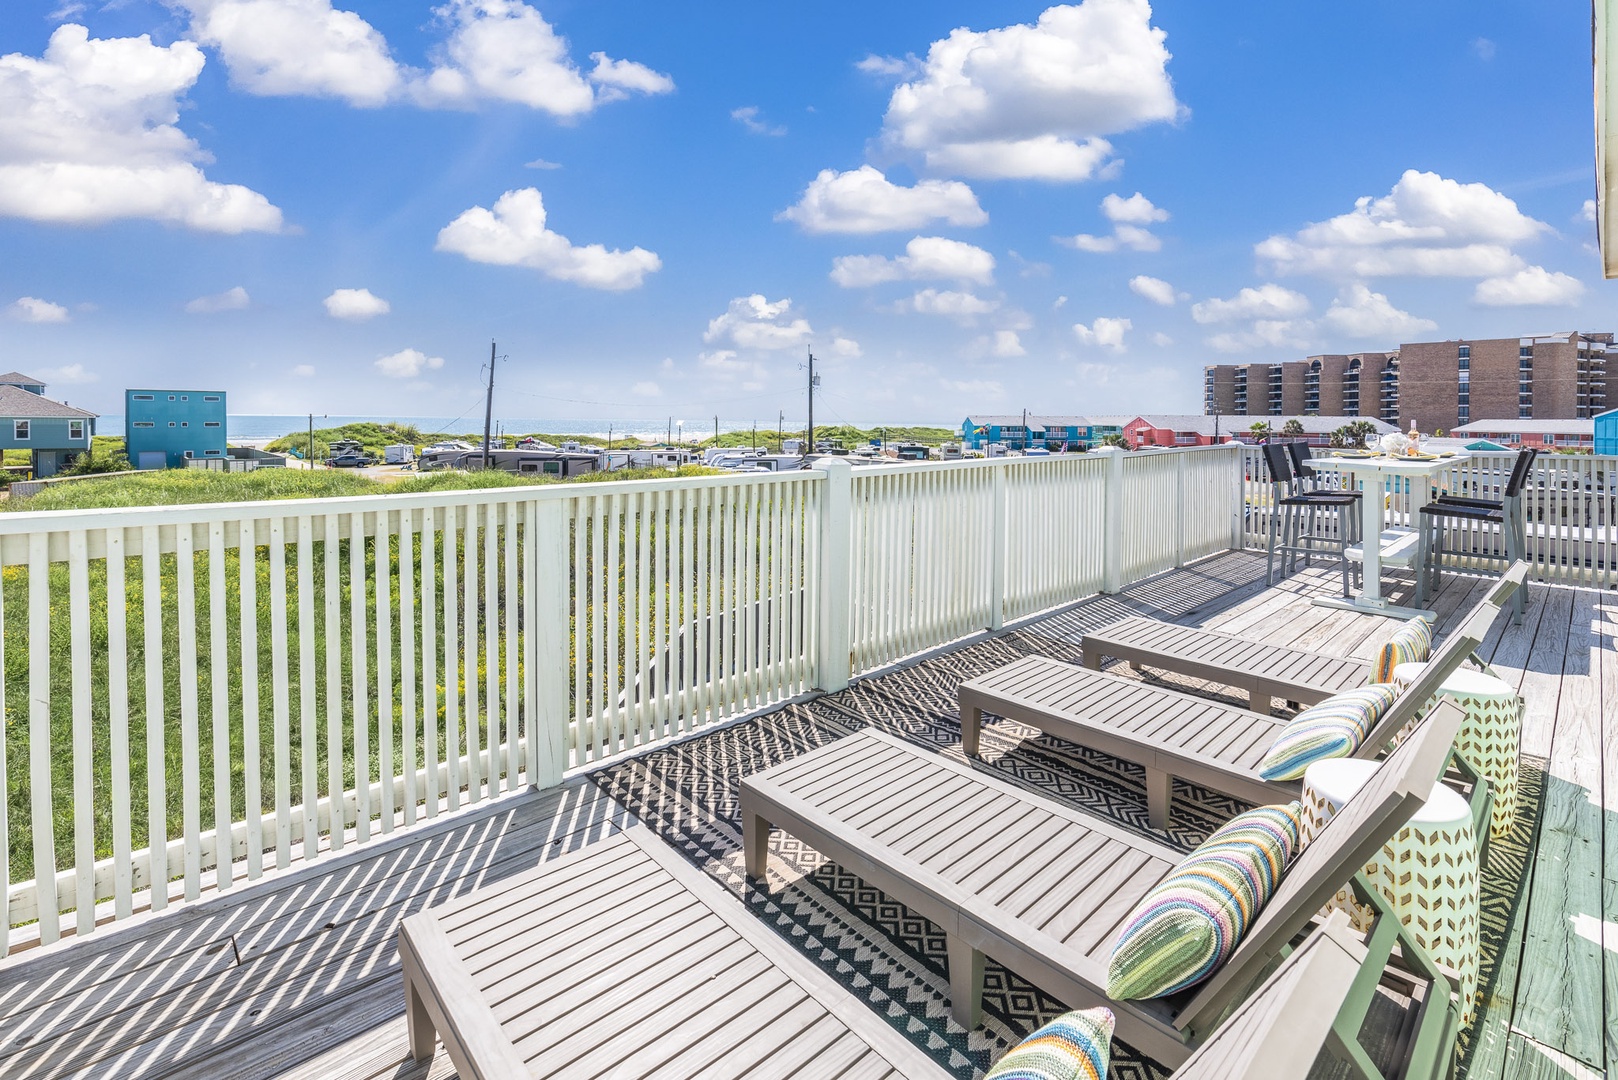 The 3rd Level Deck boasts sweeping area views and plenty of spaces to relax and dine